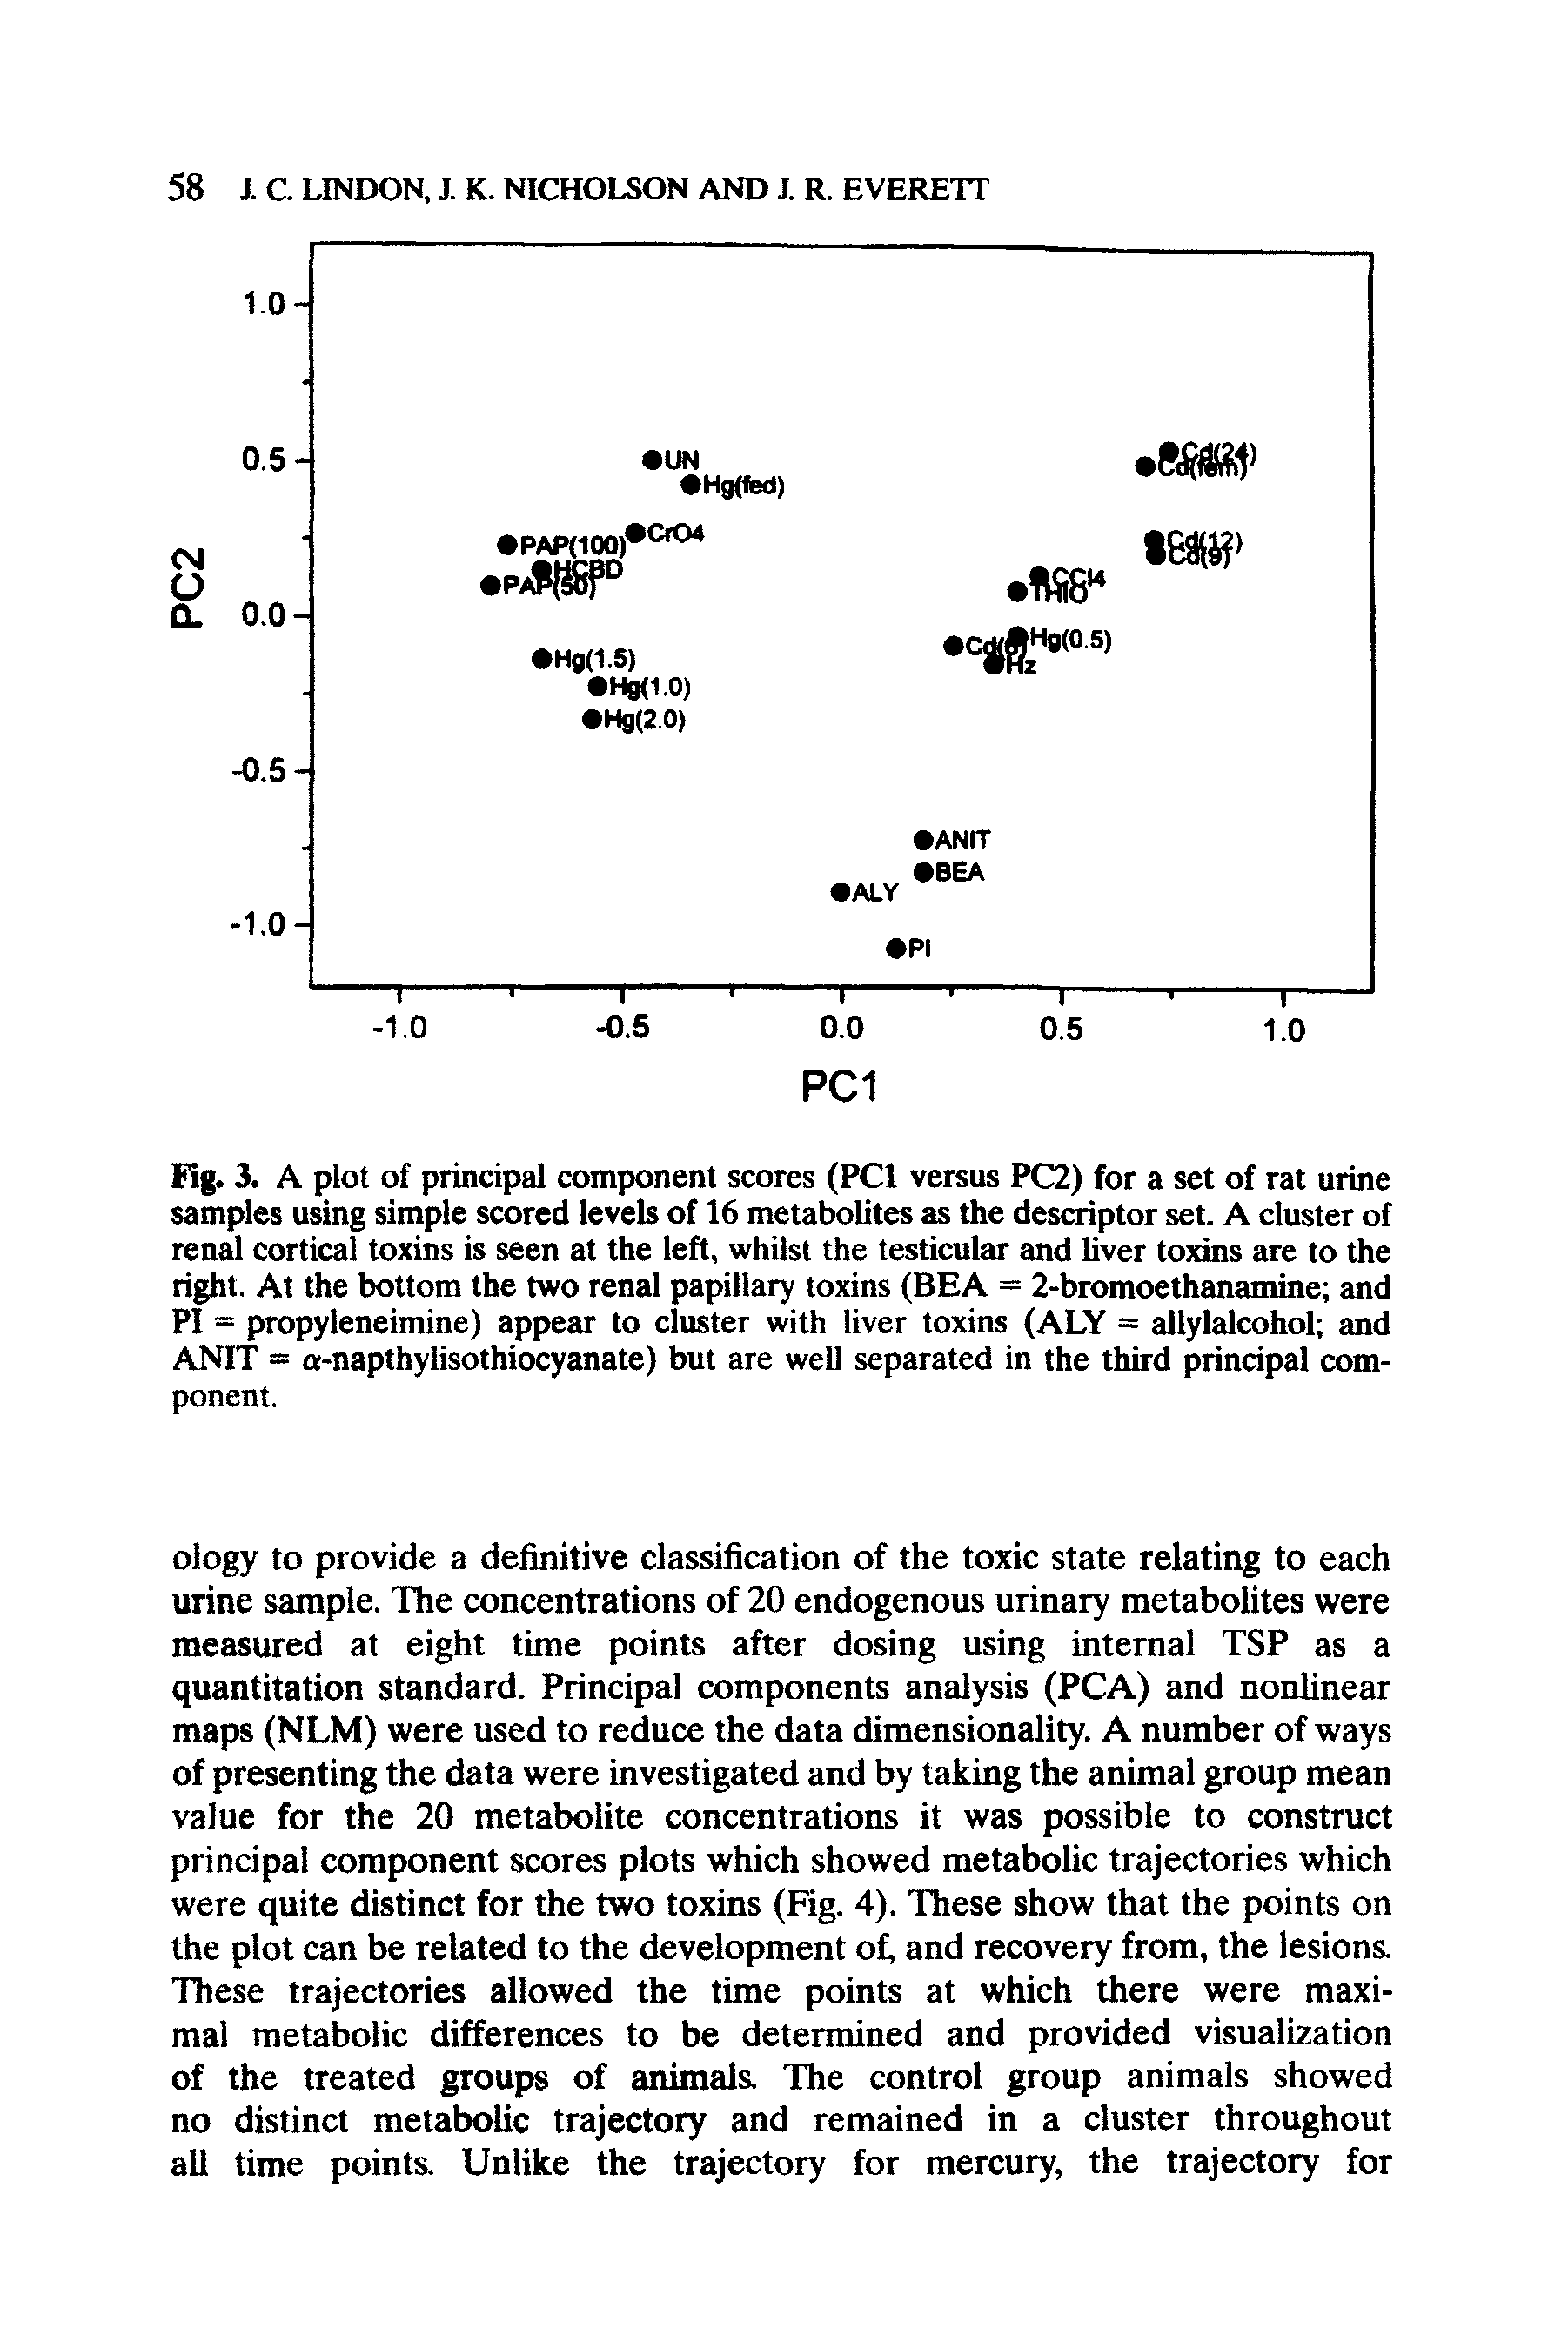 Fig. 3. A plot of principal component scores (PCI versus PC2) for a set of rat urine samples using simple scored levels of 16 metabolites as the descriptor set. A cluster of renal cortical toxins is seen at the left, whilst the testicular and liver toxins are to the right. At the bottom the two renal papillary toxins (BEA = 2-bromoethanamine and PI = propyleneimine) appear to cluster with liver toxins (ALY = allylalcohol and ANIT = o-napthylisothiocyanate) but are well separated in the third principal component.